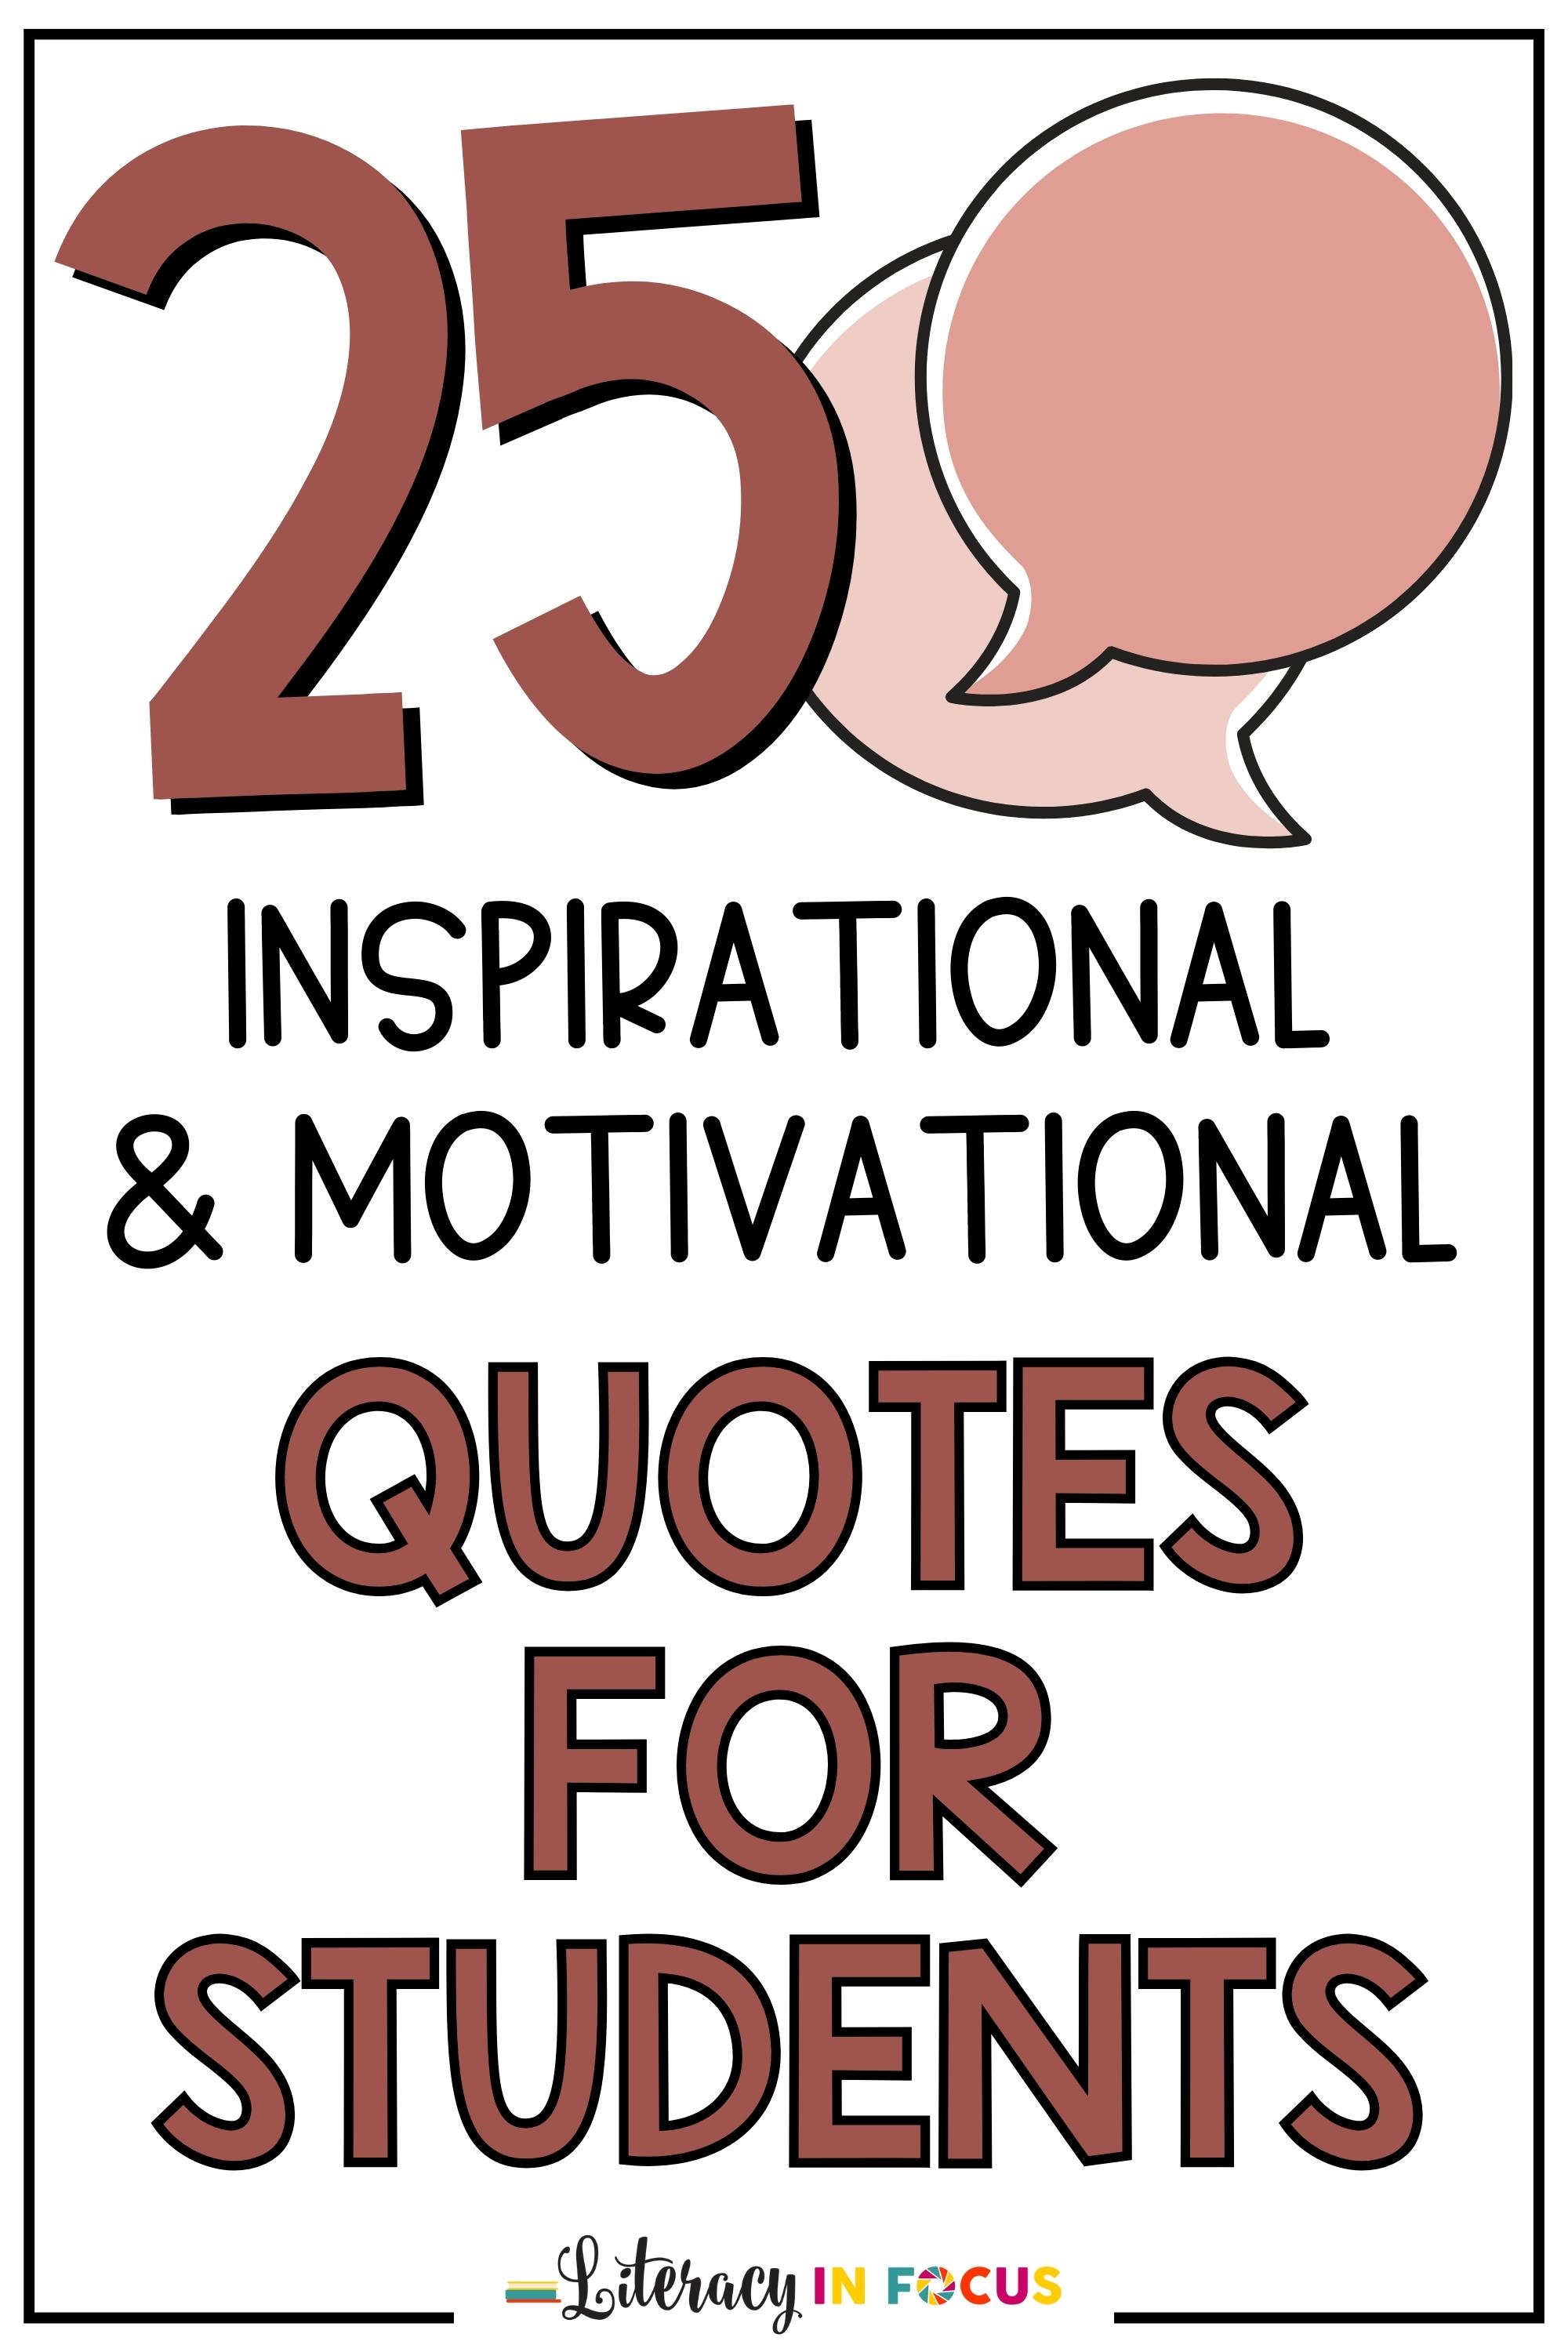 25 Inspirational  & Motivational Quotes for Students